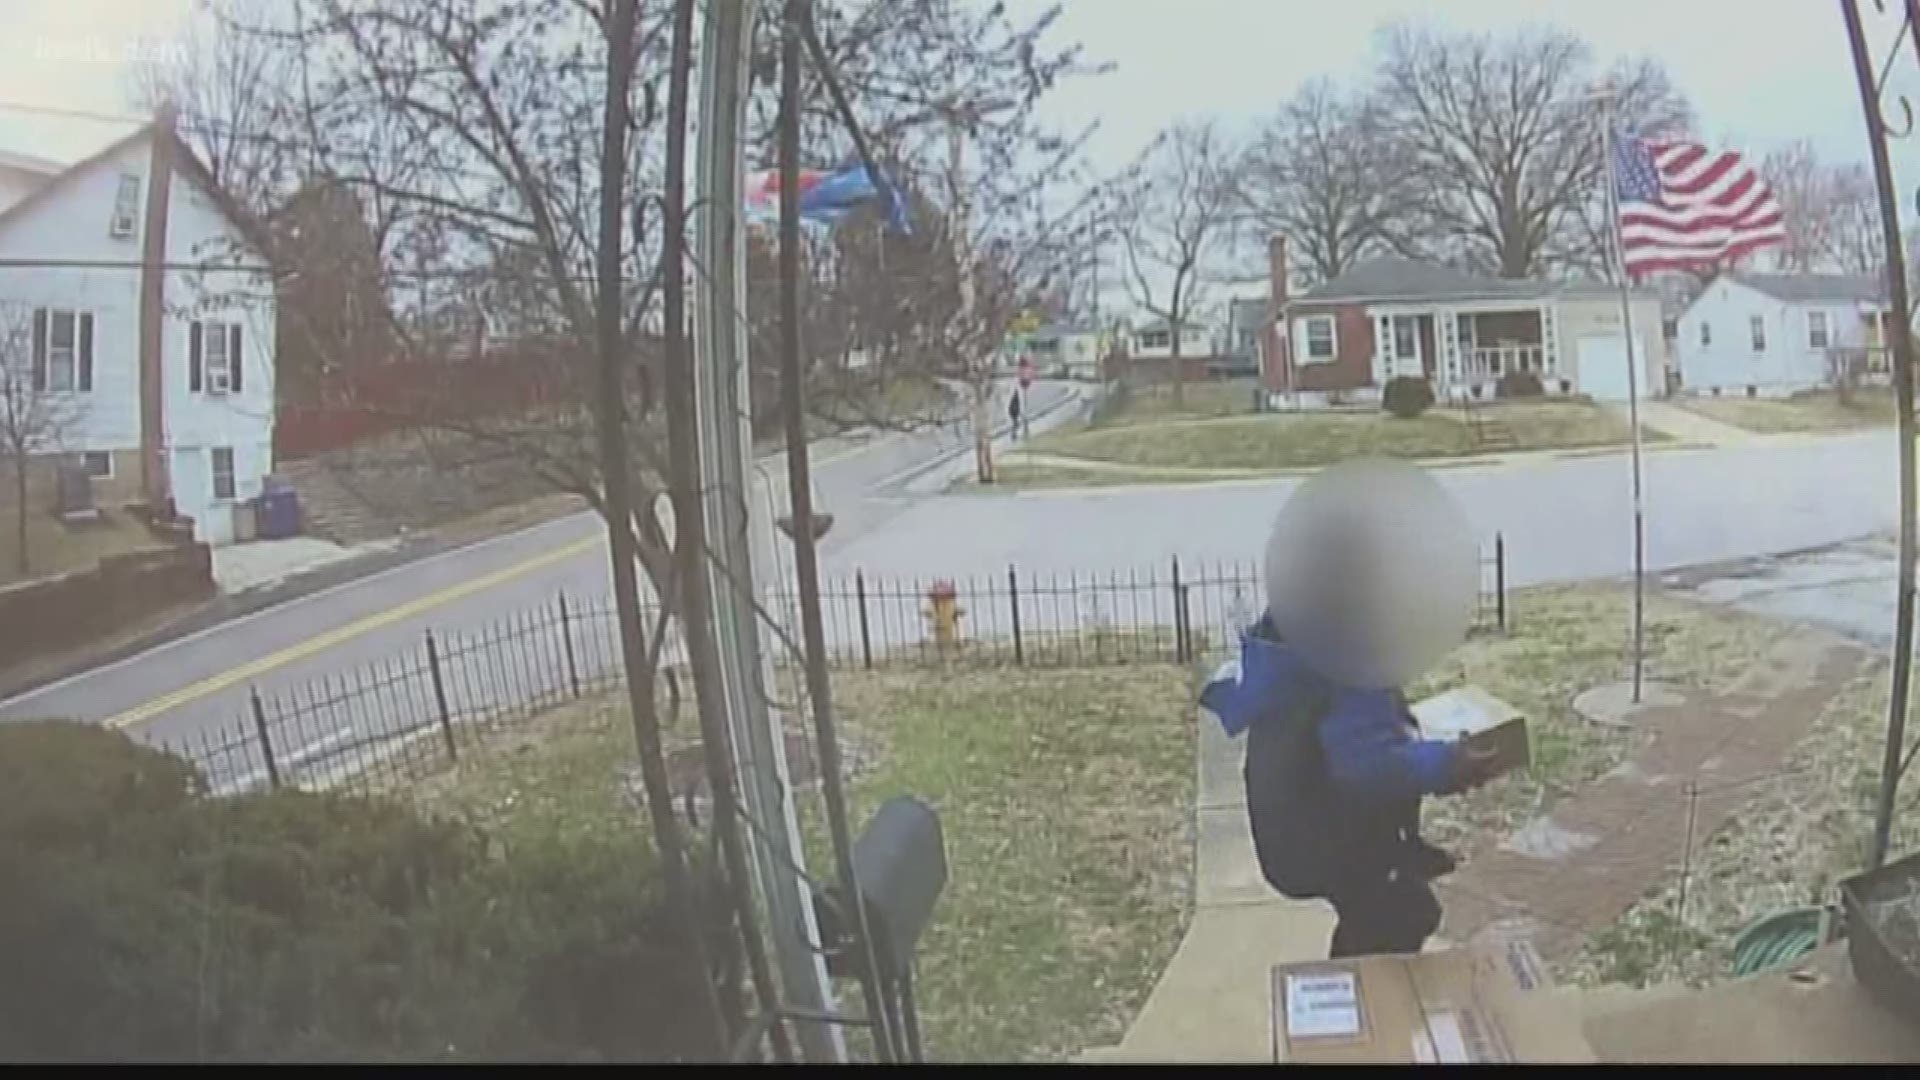 A St. Louis woman is warning neighbors to be on the lookout after her package was stolen in broad daylight.